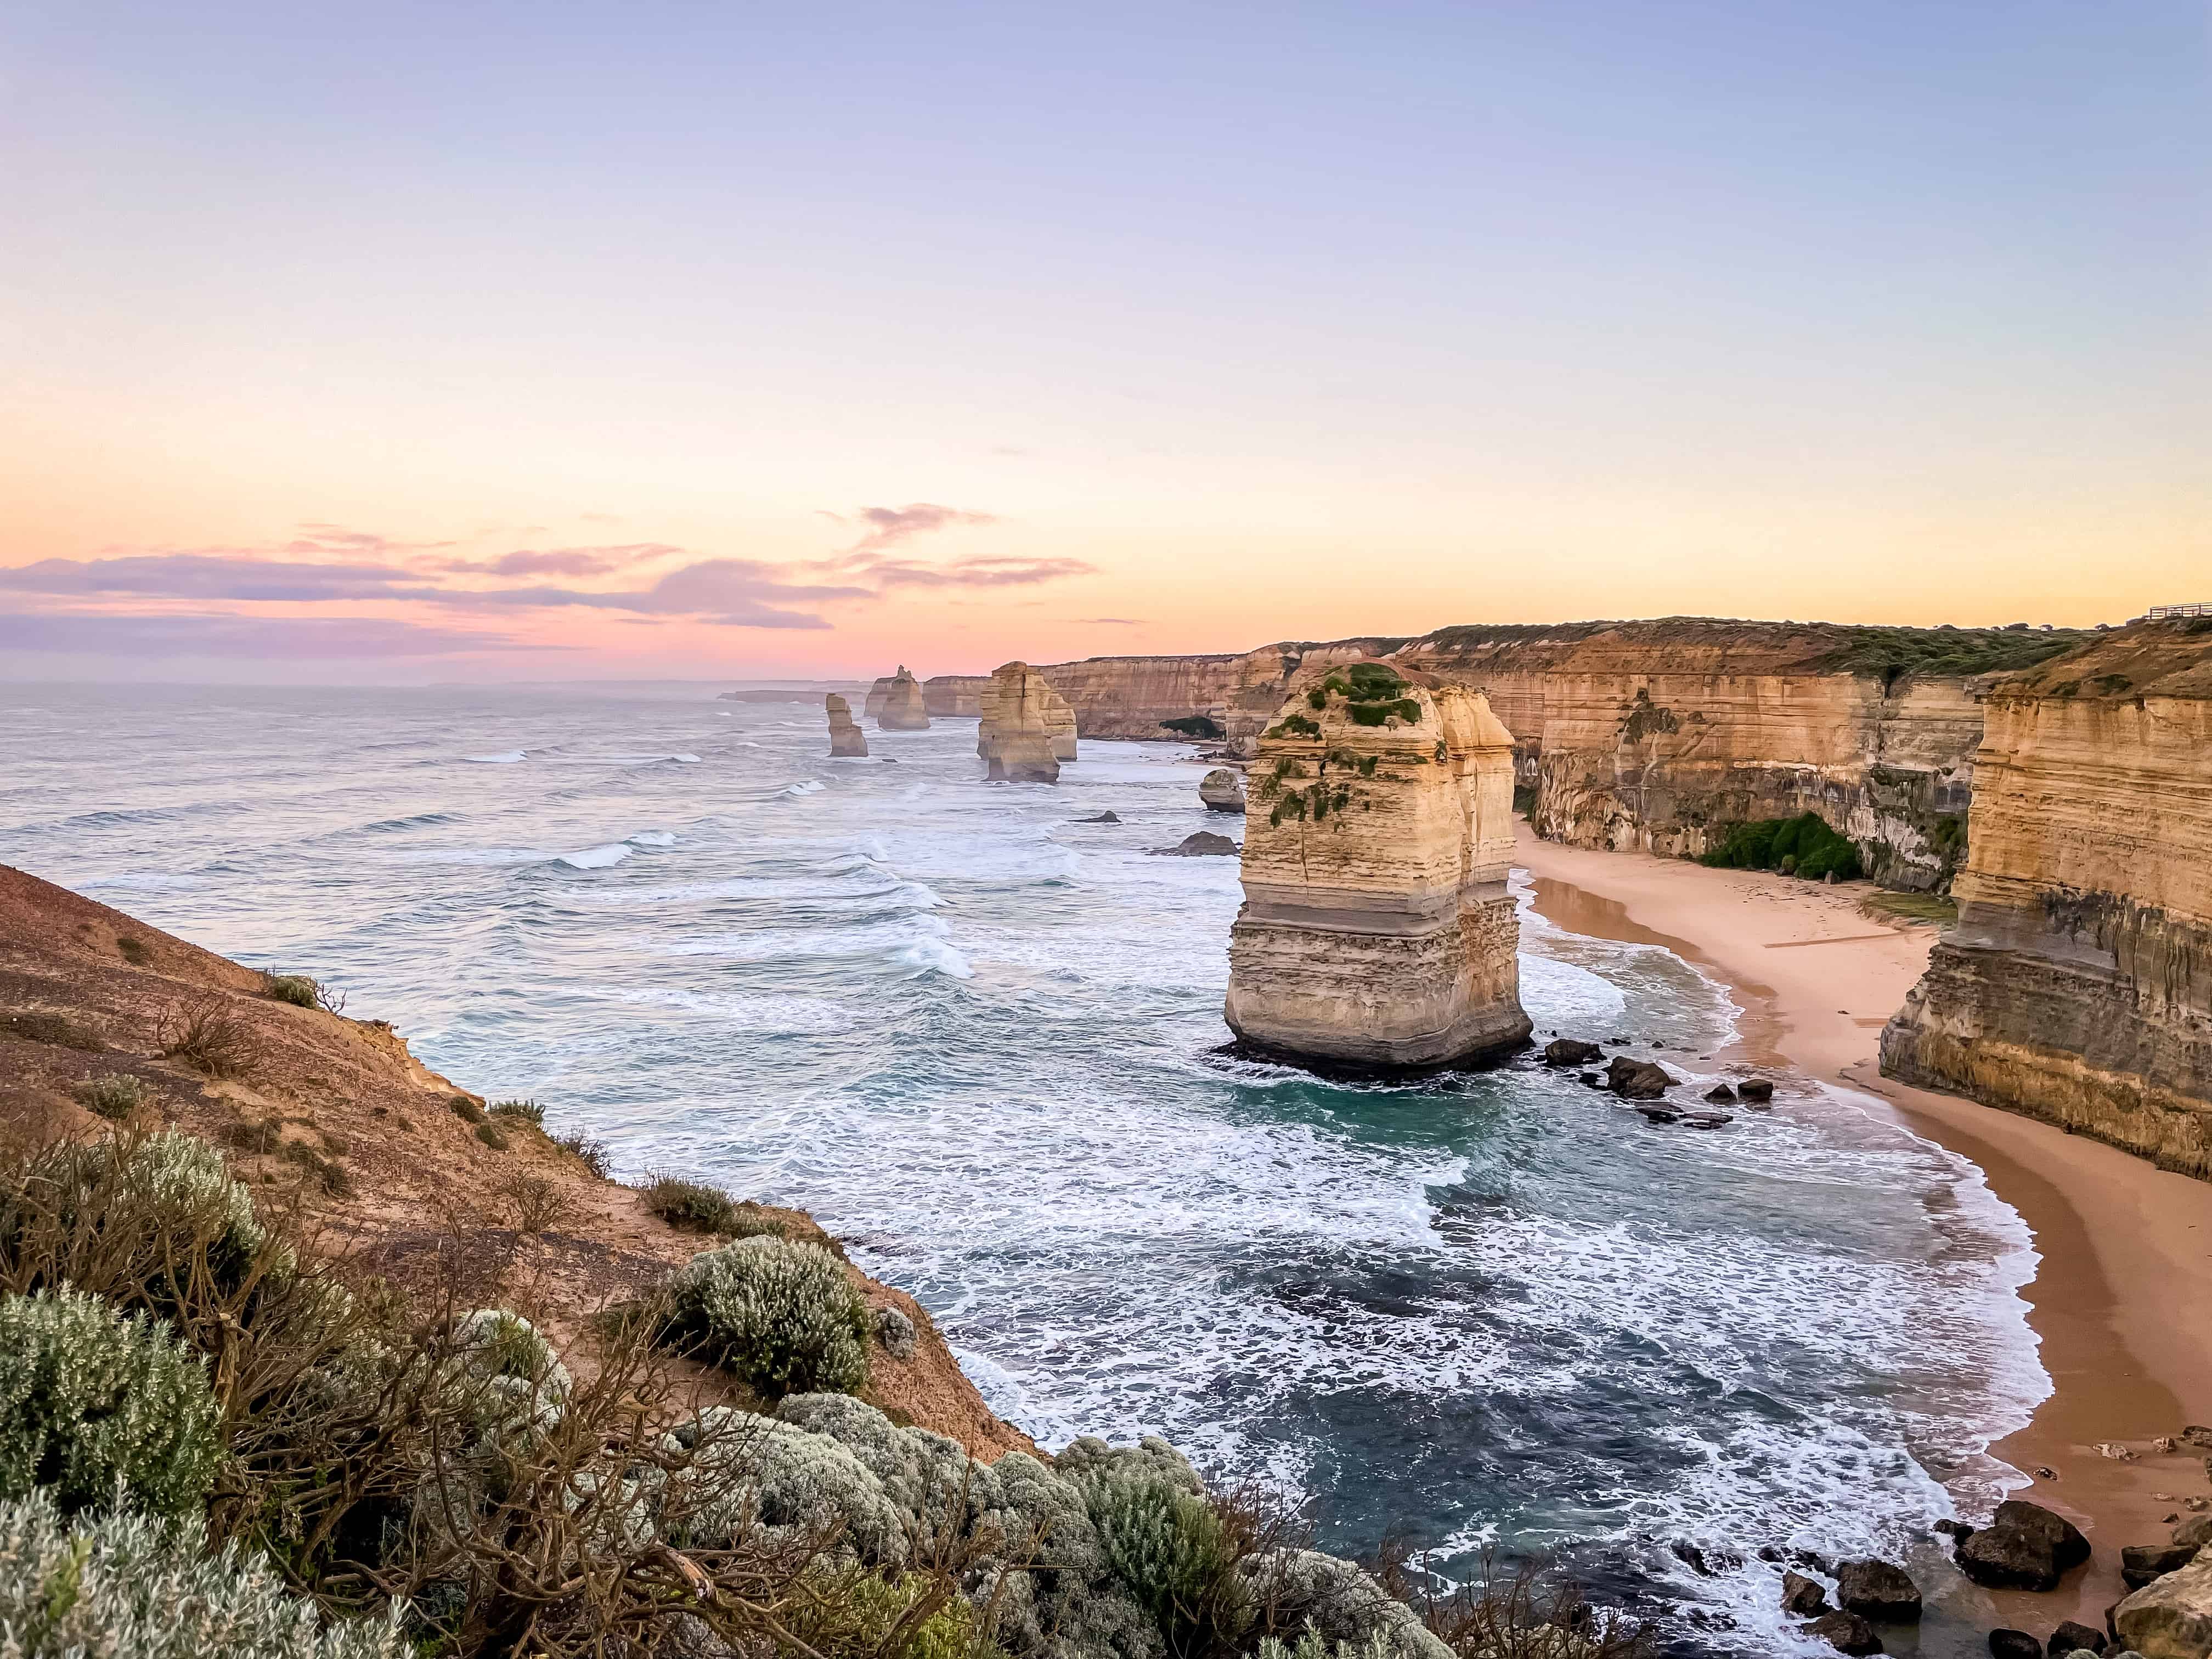 Driving the Great Ocean Road to the Twelve Apostles